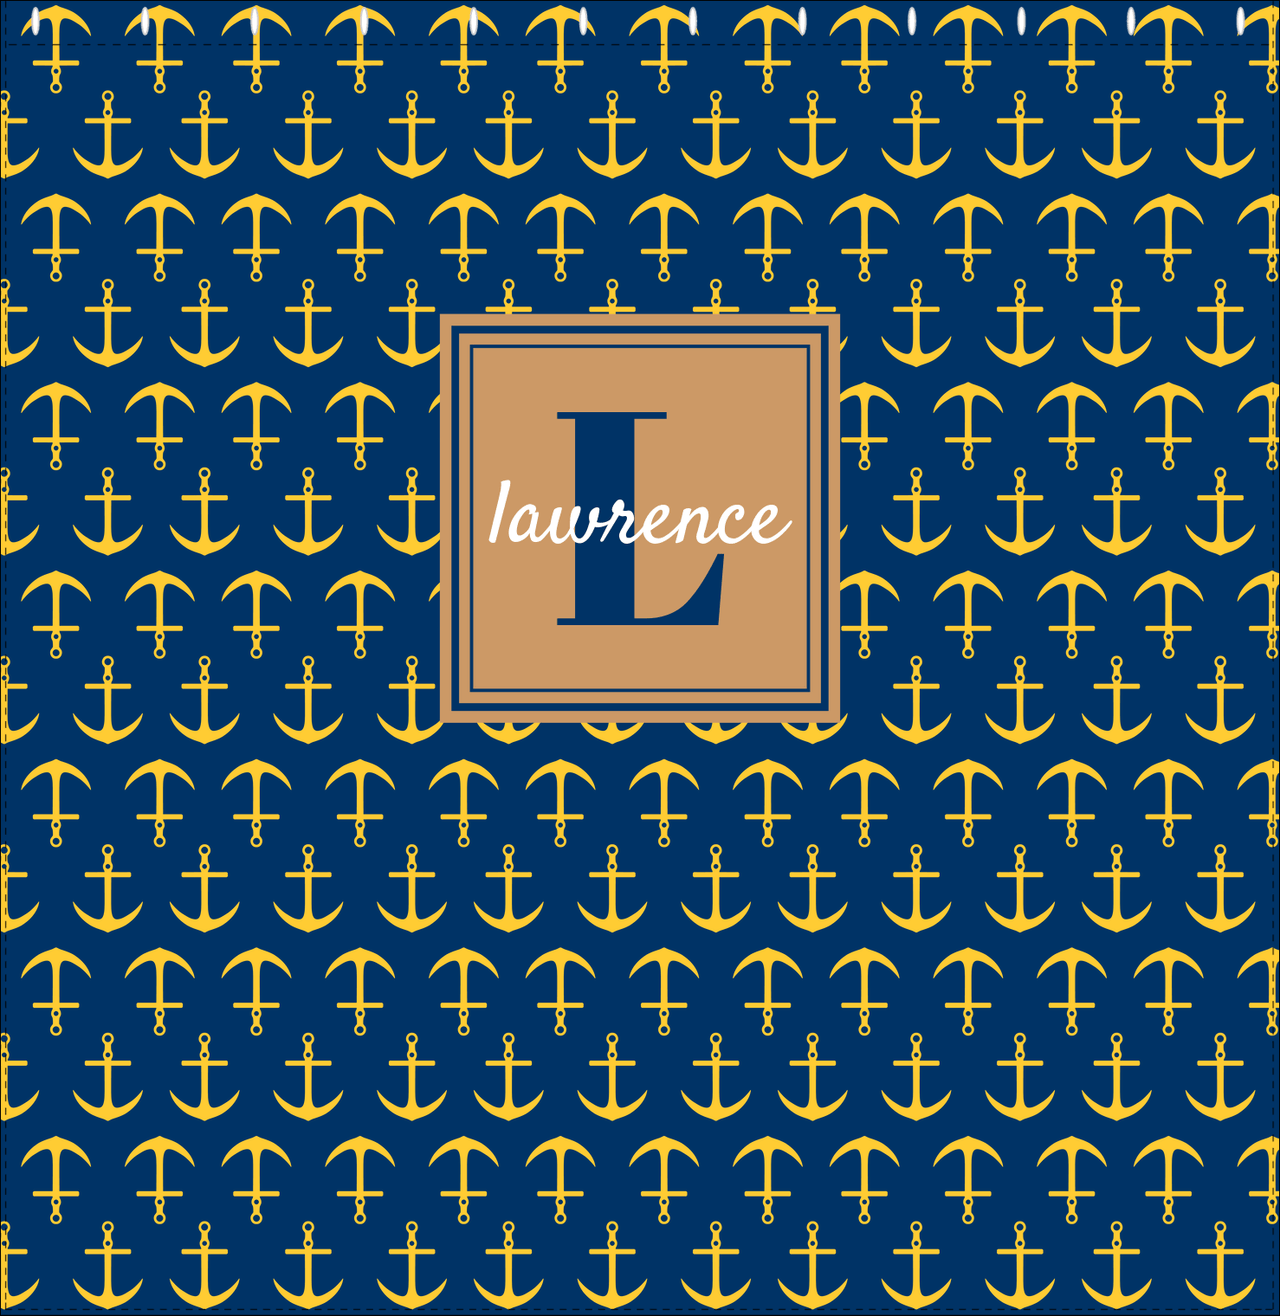 Personalized Anchors Shower Curtain - Navy and Gold - Square Nameplate - Decorate View